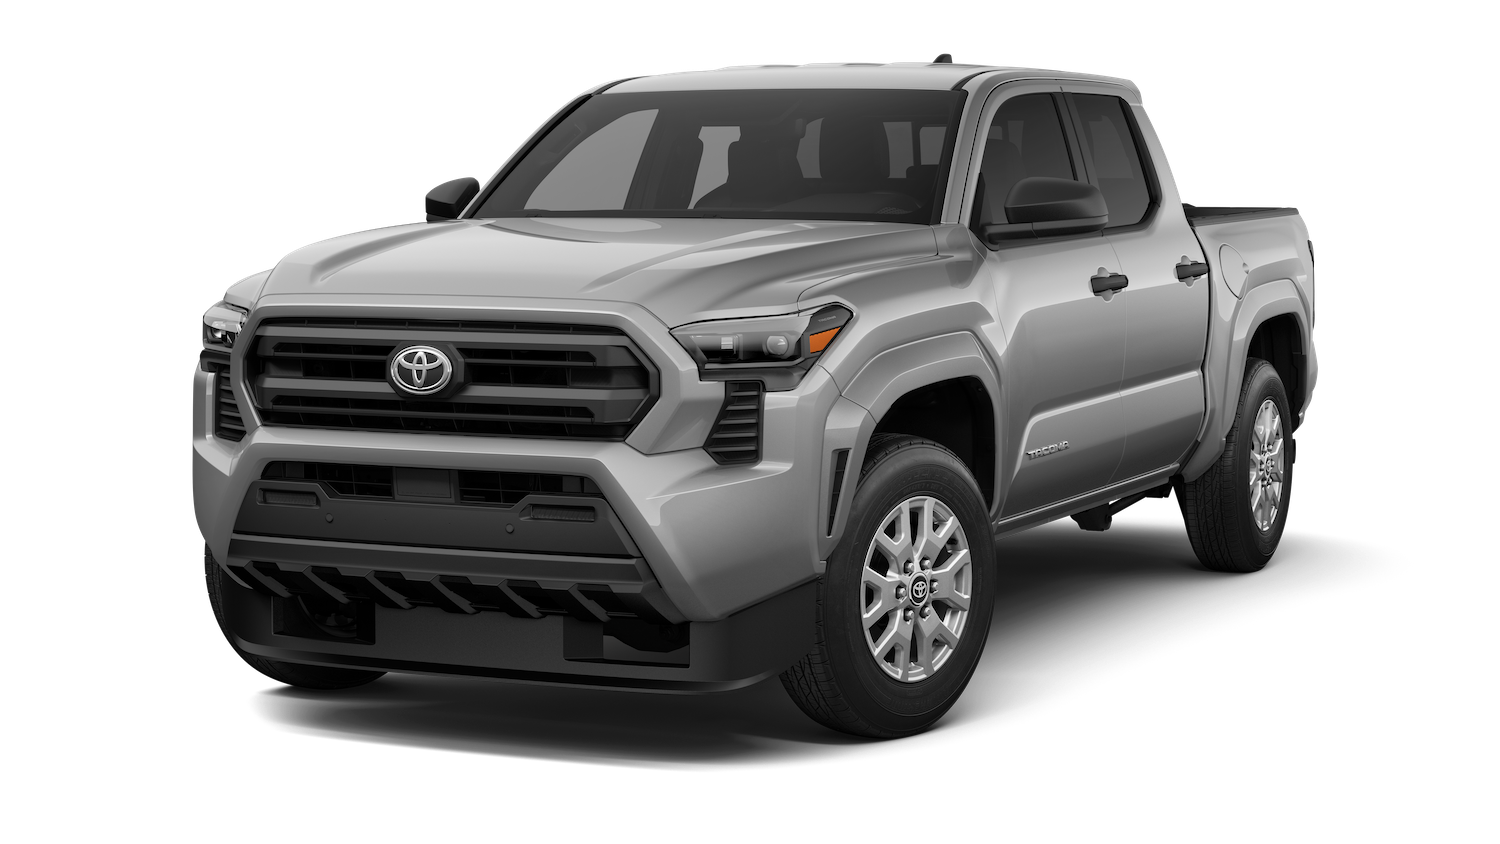 2024 Tacoma 2024 Tacoma SR5 - Specs, Price, MPG, Options/Packages, Features & Photos 2024-tacoma-srt